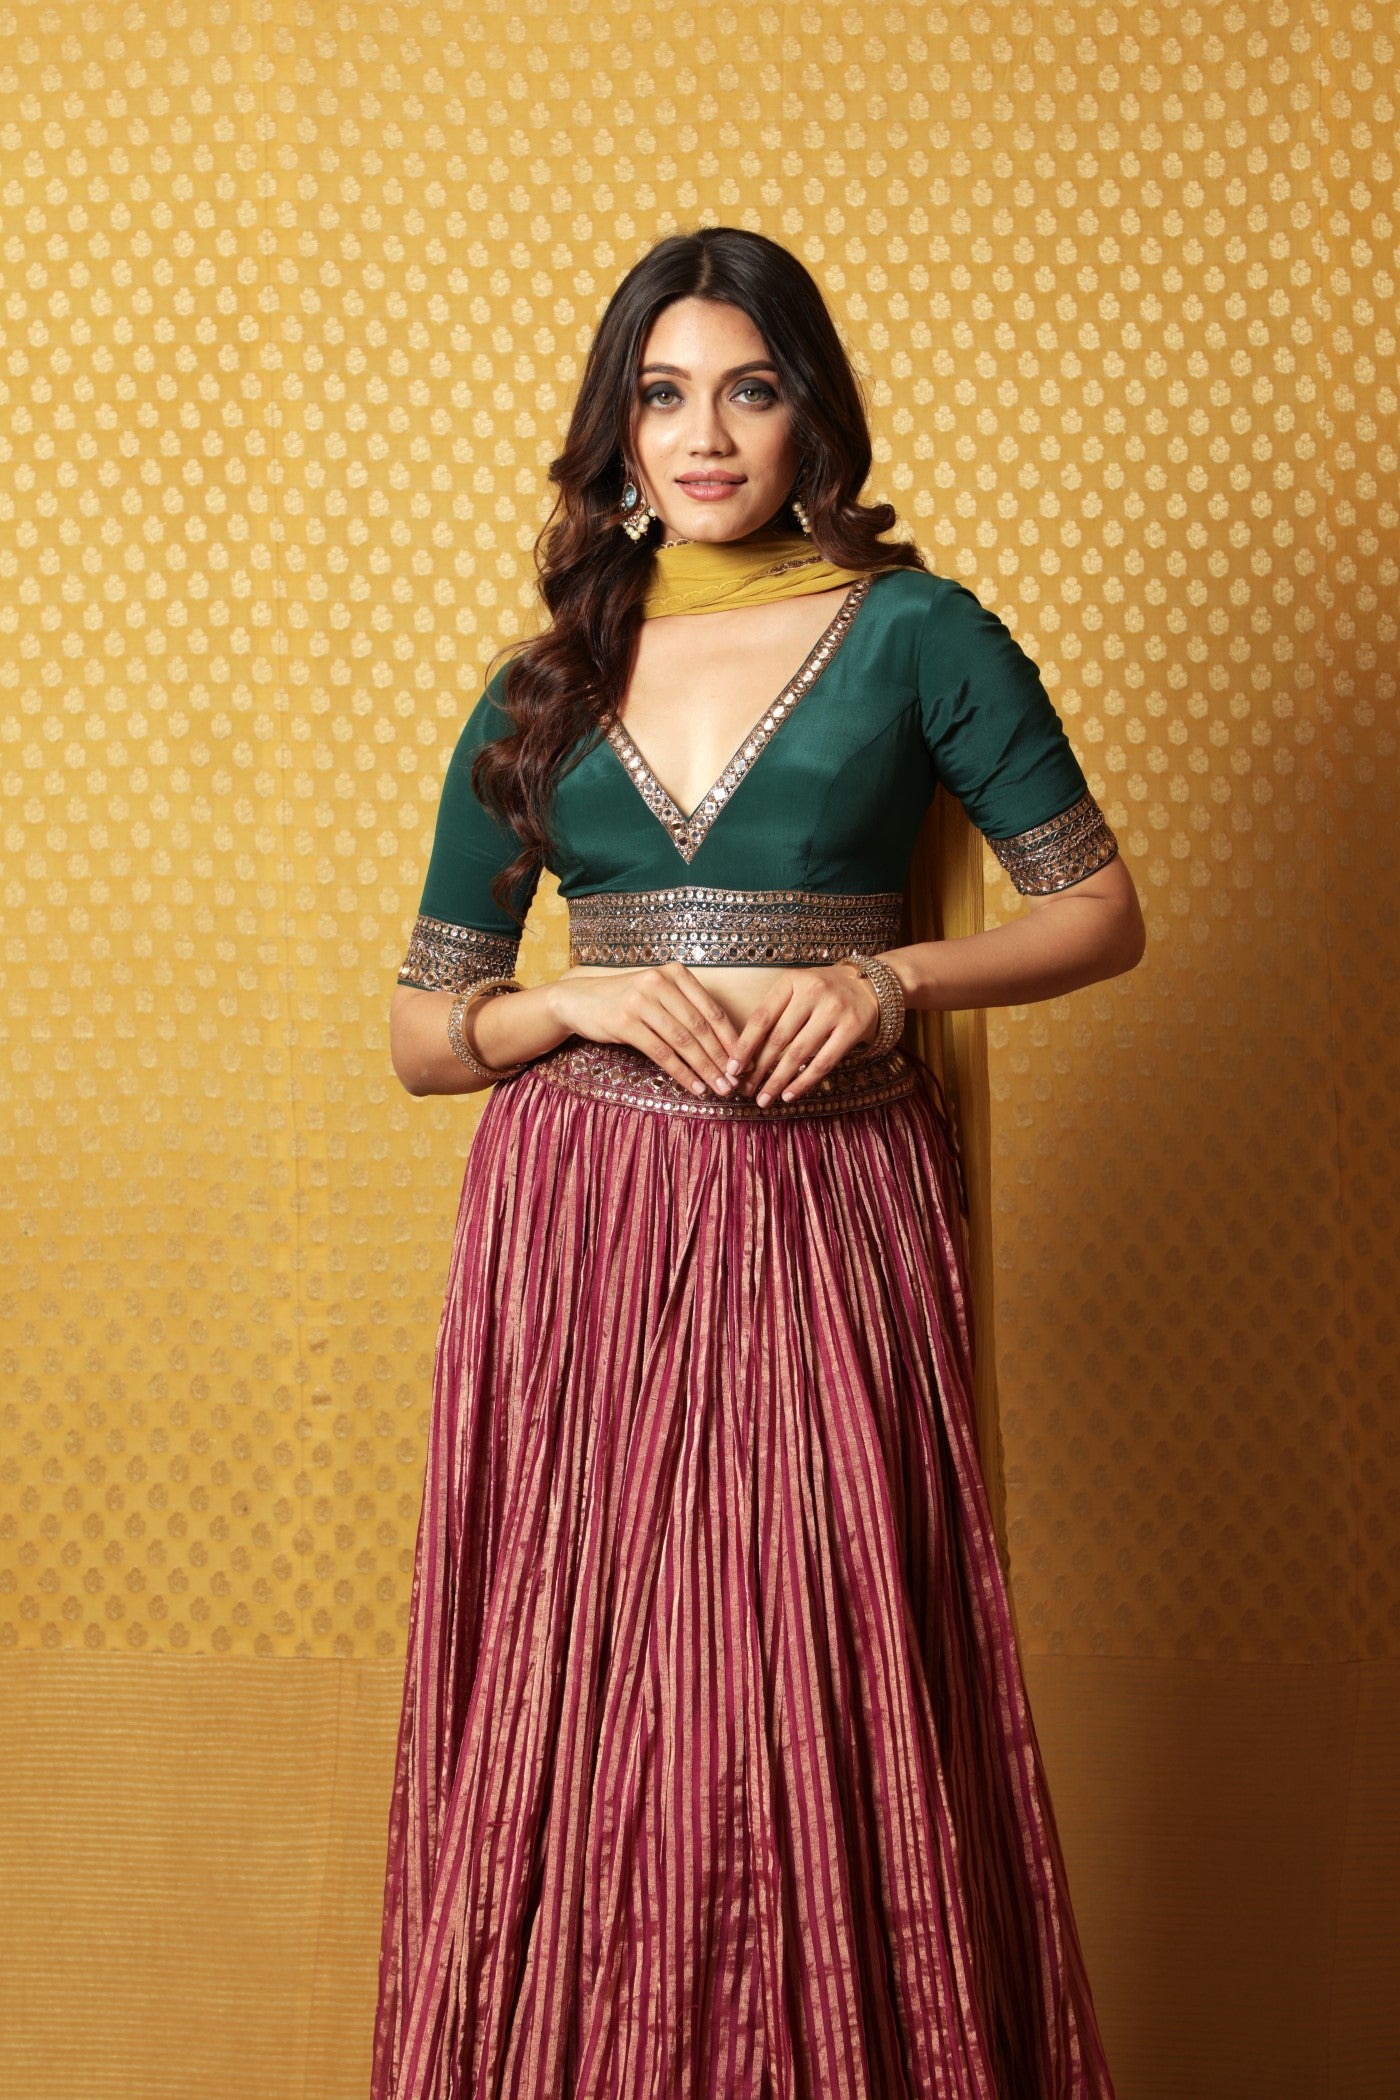 Hand-Embroidered Wine-Coloured Striped Pure Silk-Cotton Lehenga Paired With Pure Crepe-Silk Blouse & Chiffon Dupatta
(Wine, Dark Green & Dusty-Lime)